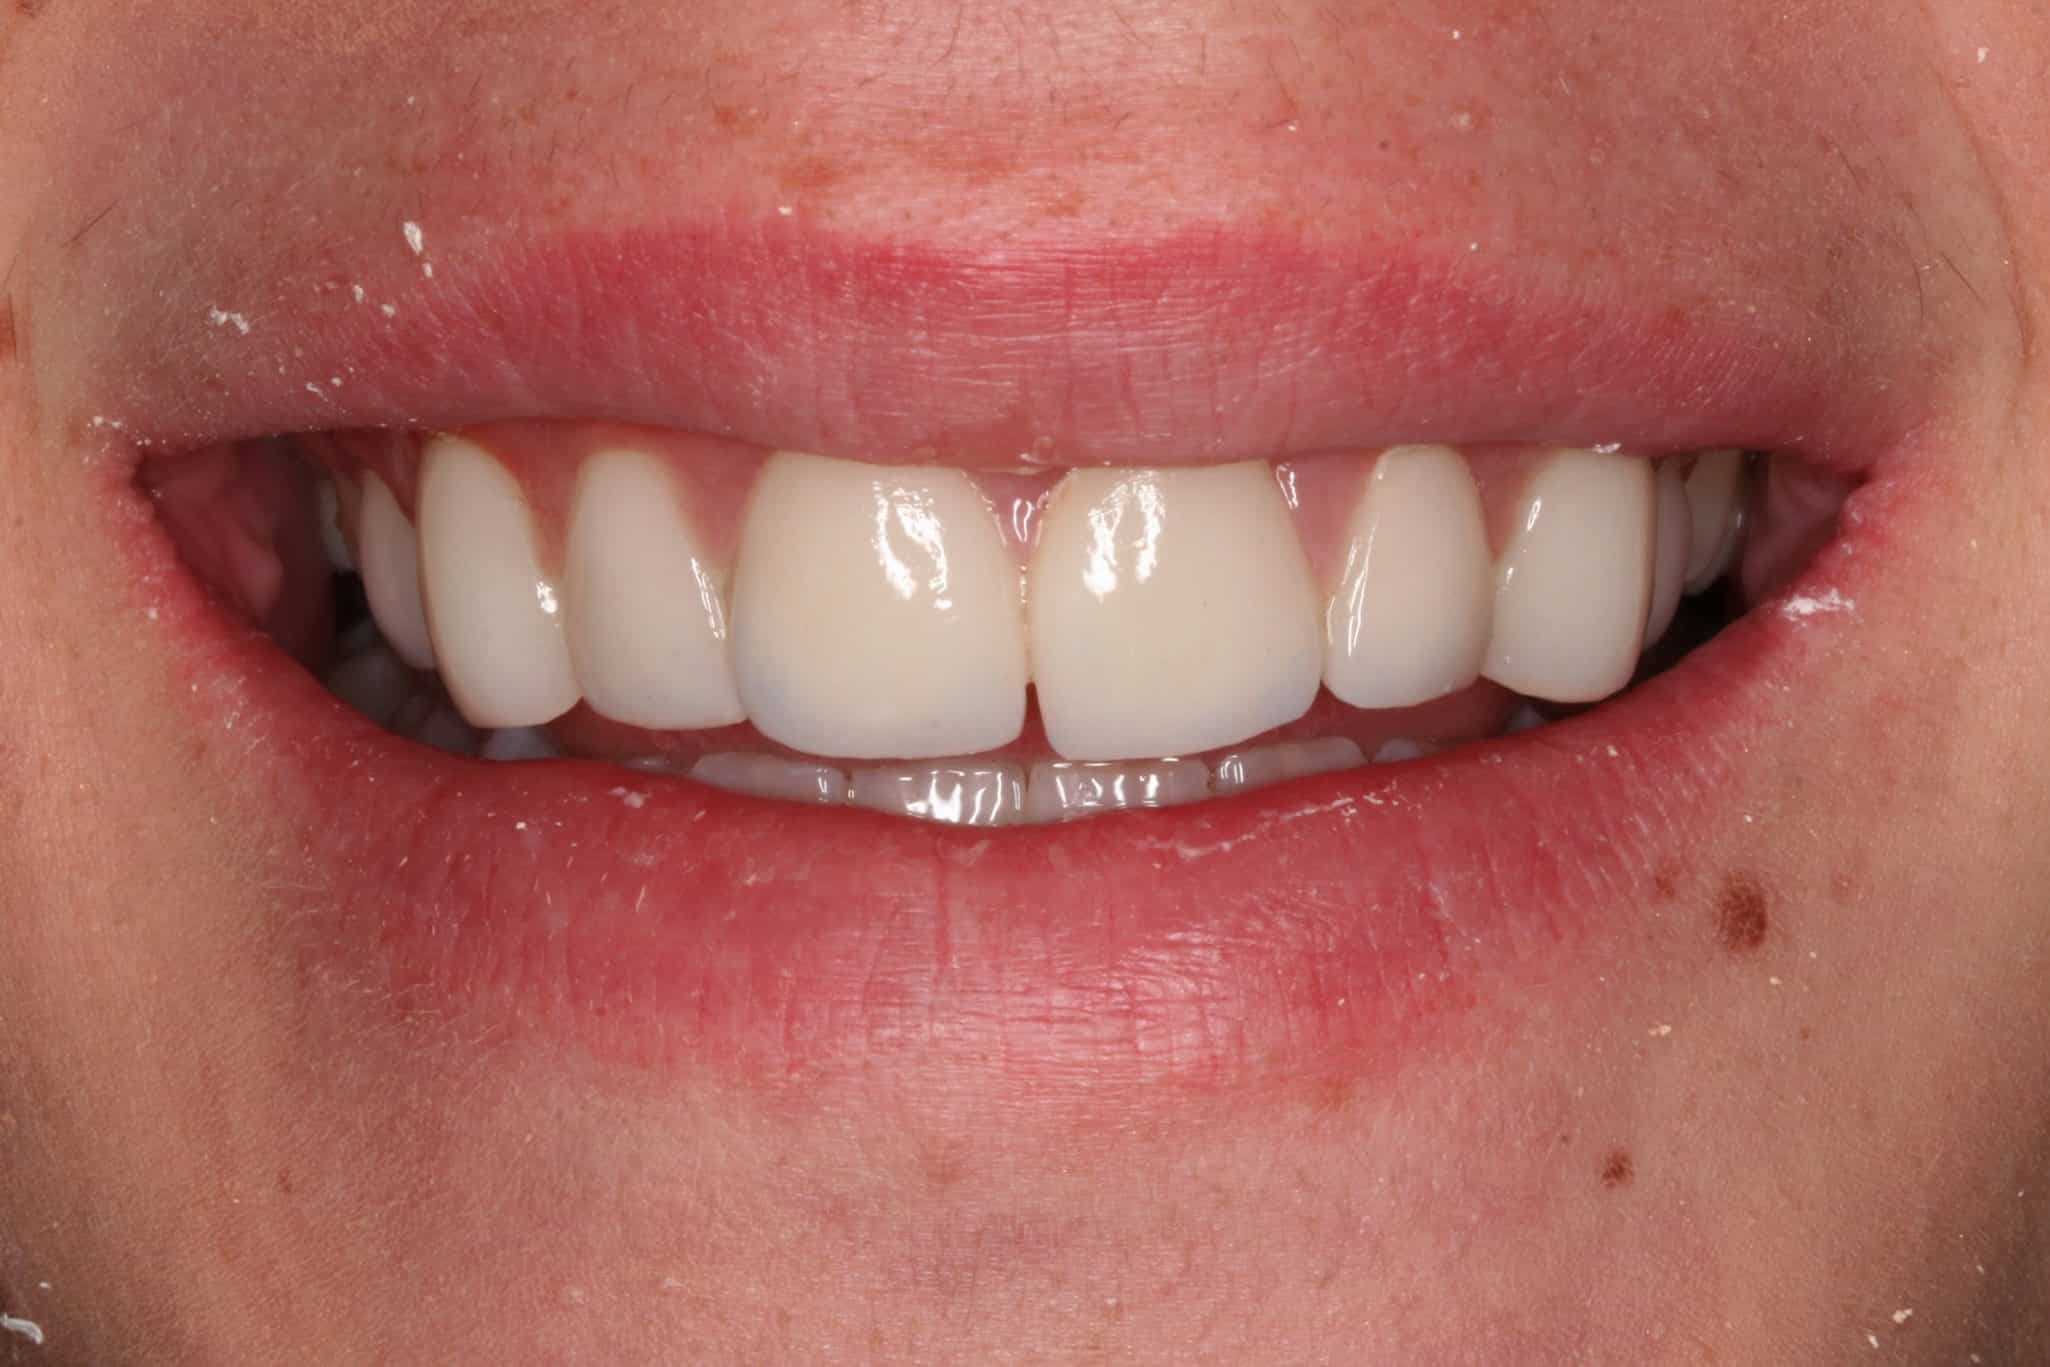 Are All Veneers the Same? Or Is It a Artform?